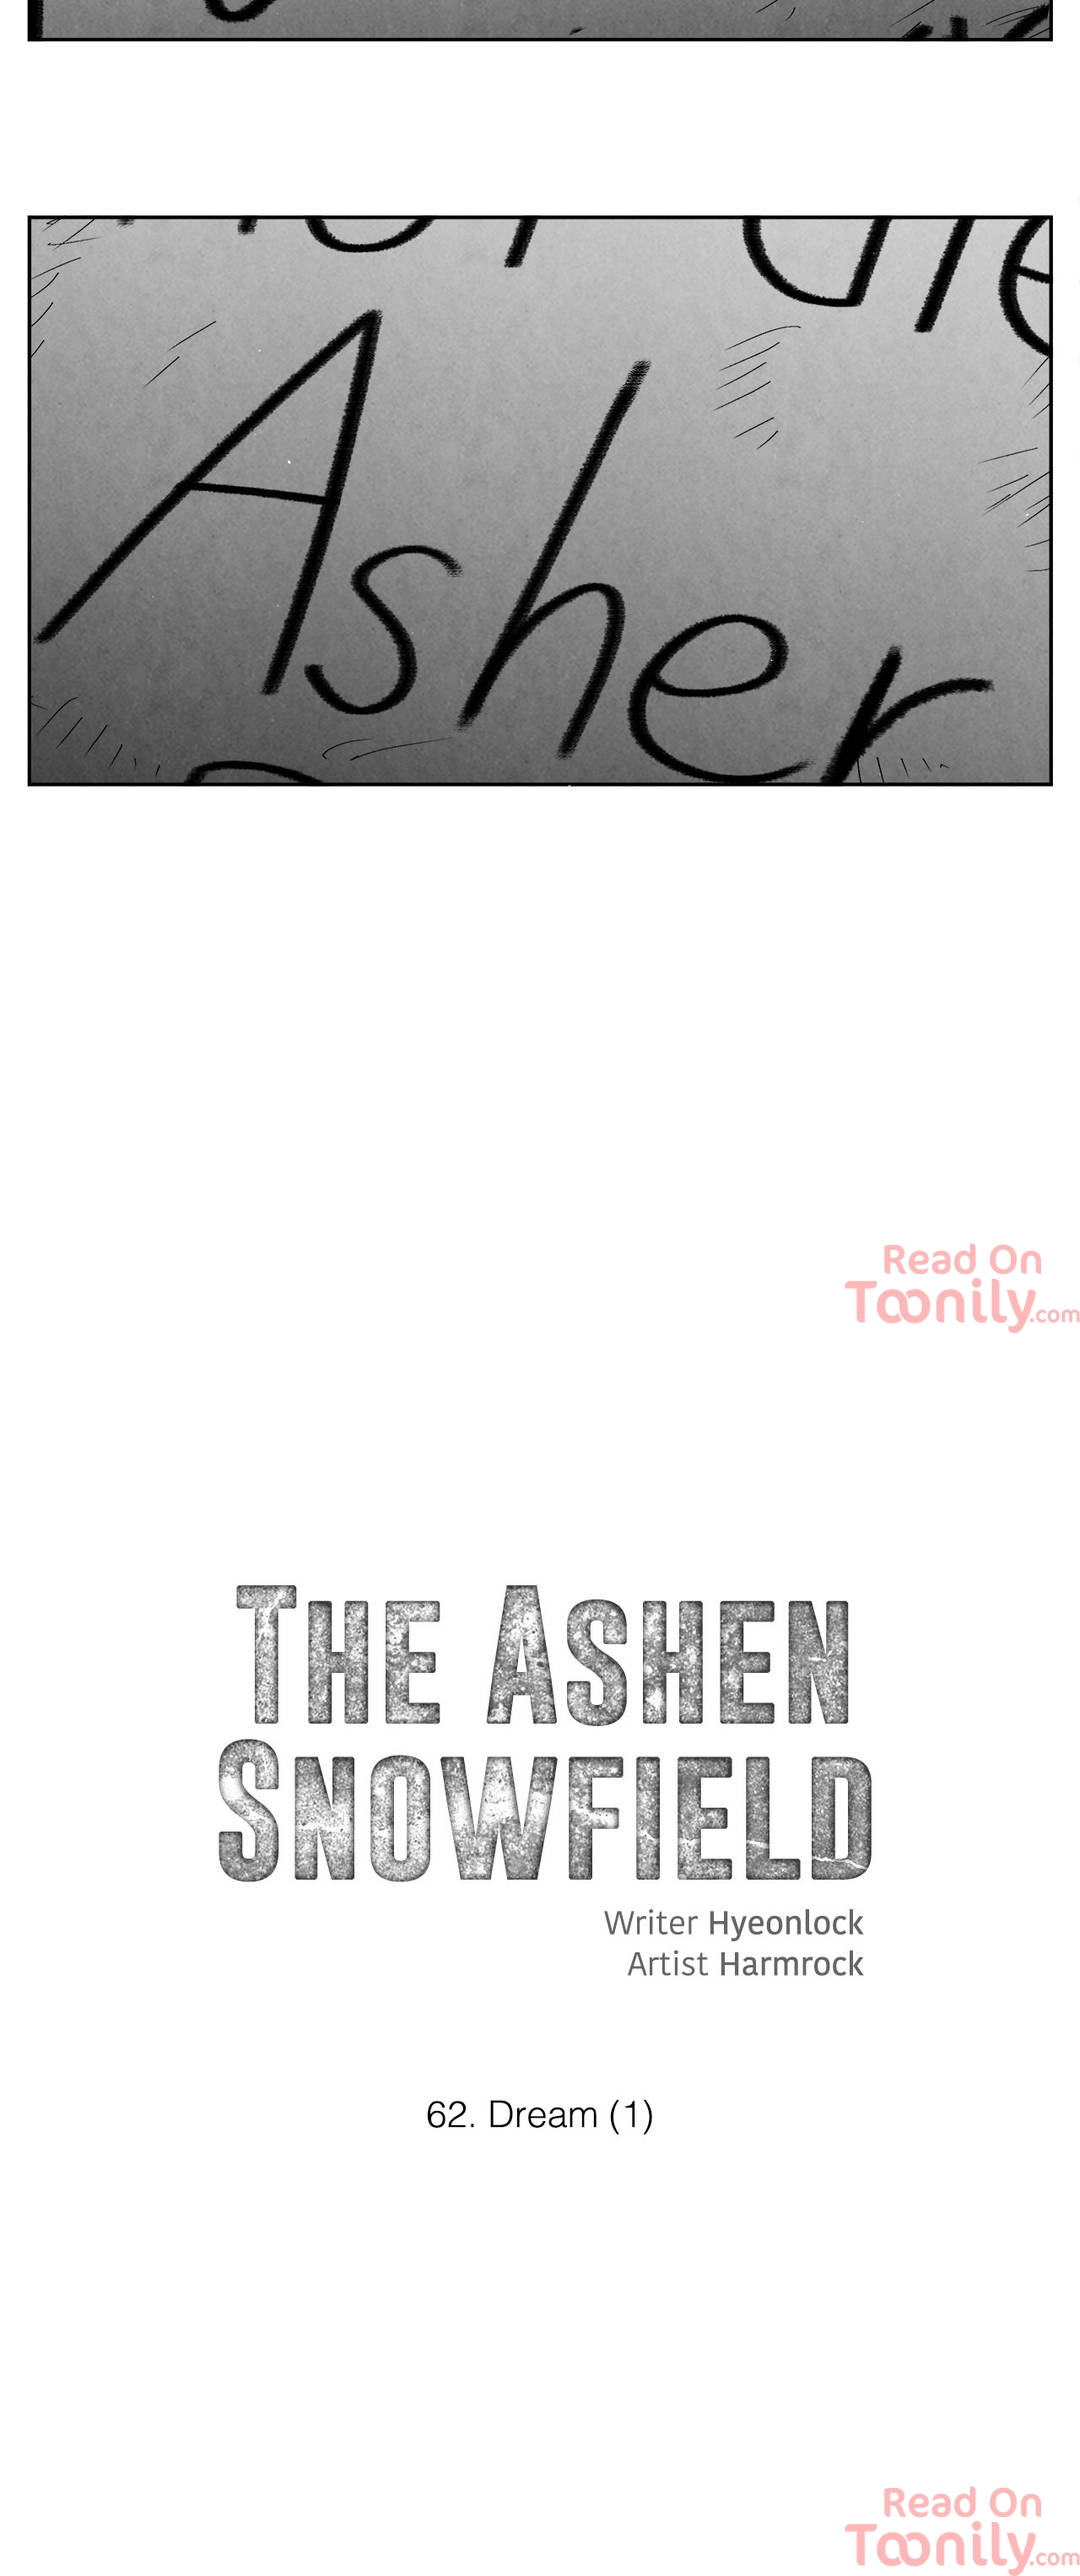 The Ashen Snowfield image